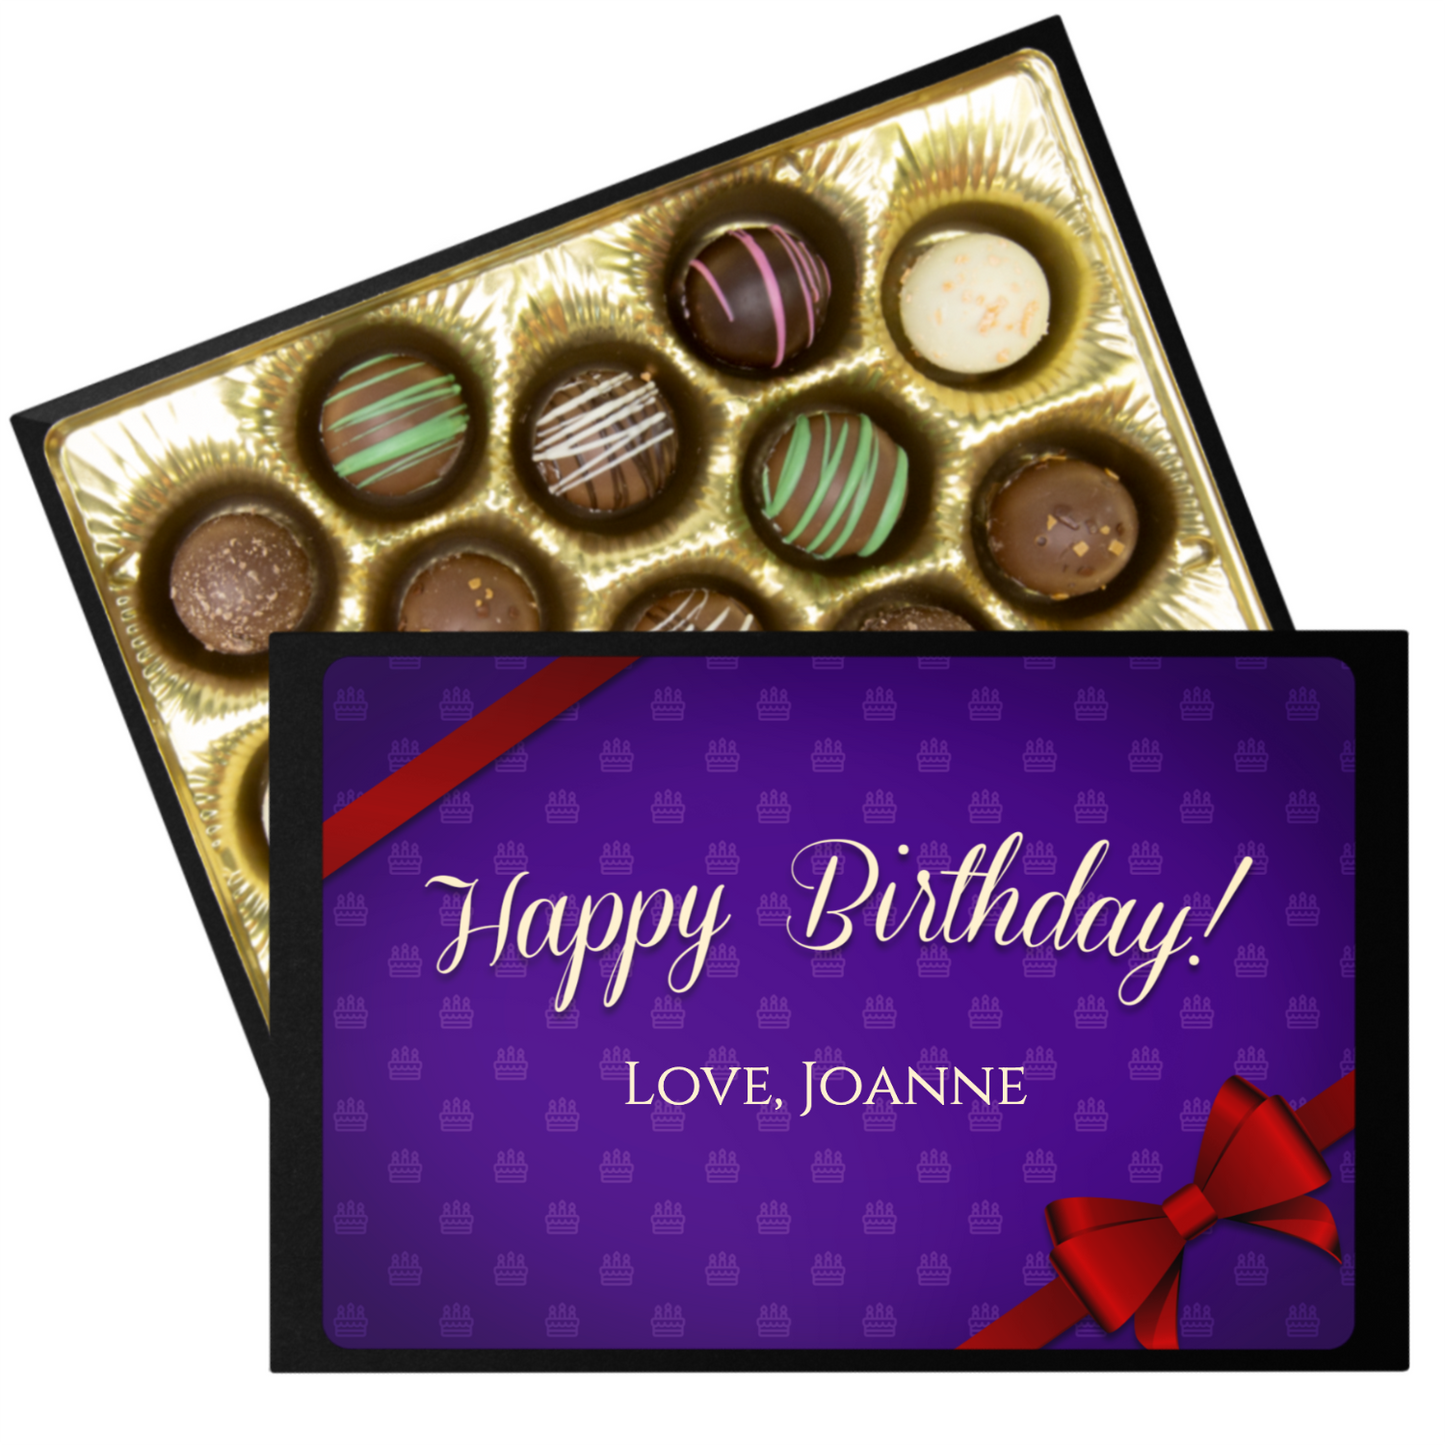 Happy Birthday Chocolate Gift, Chocolate Truffles Personalized With Your Name